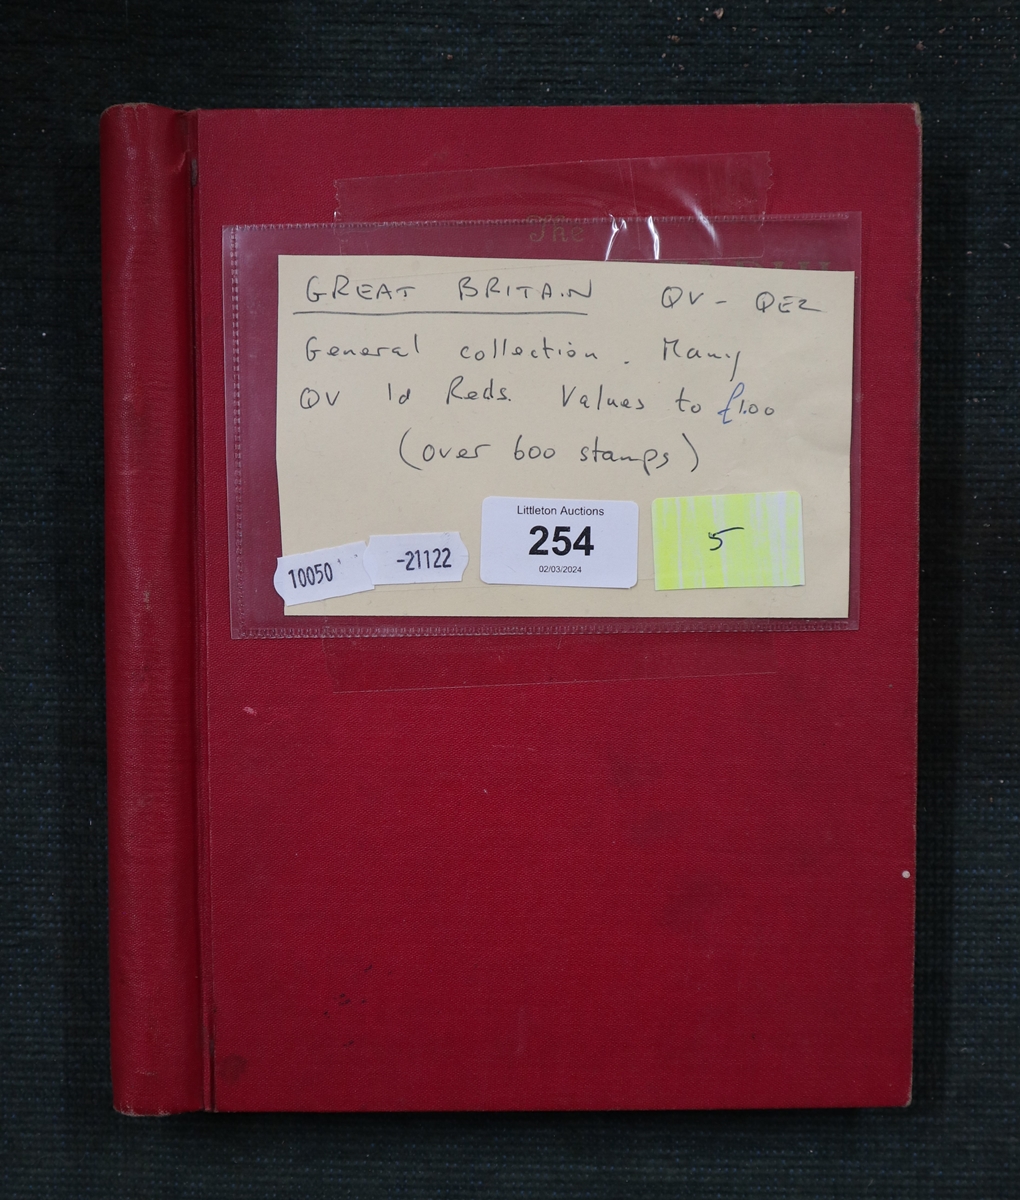 Stamps - Great Britain QV-QE2 collection on album. many QV 1d reds later values to £1.00 (600+)